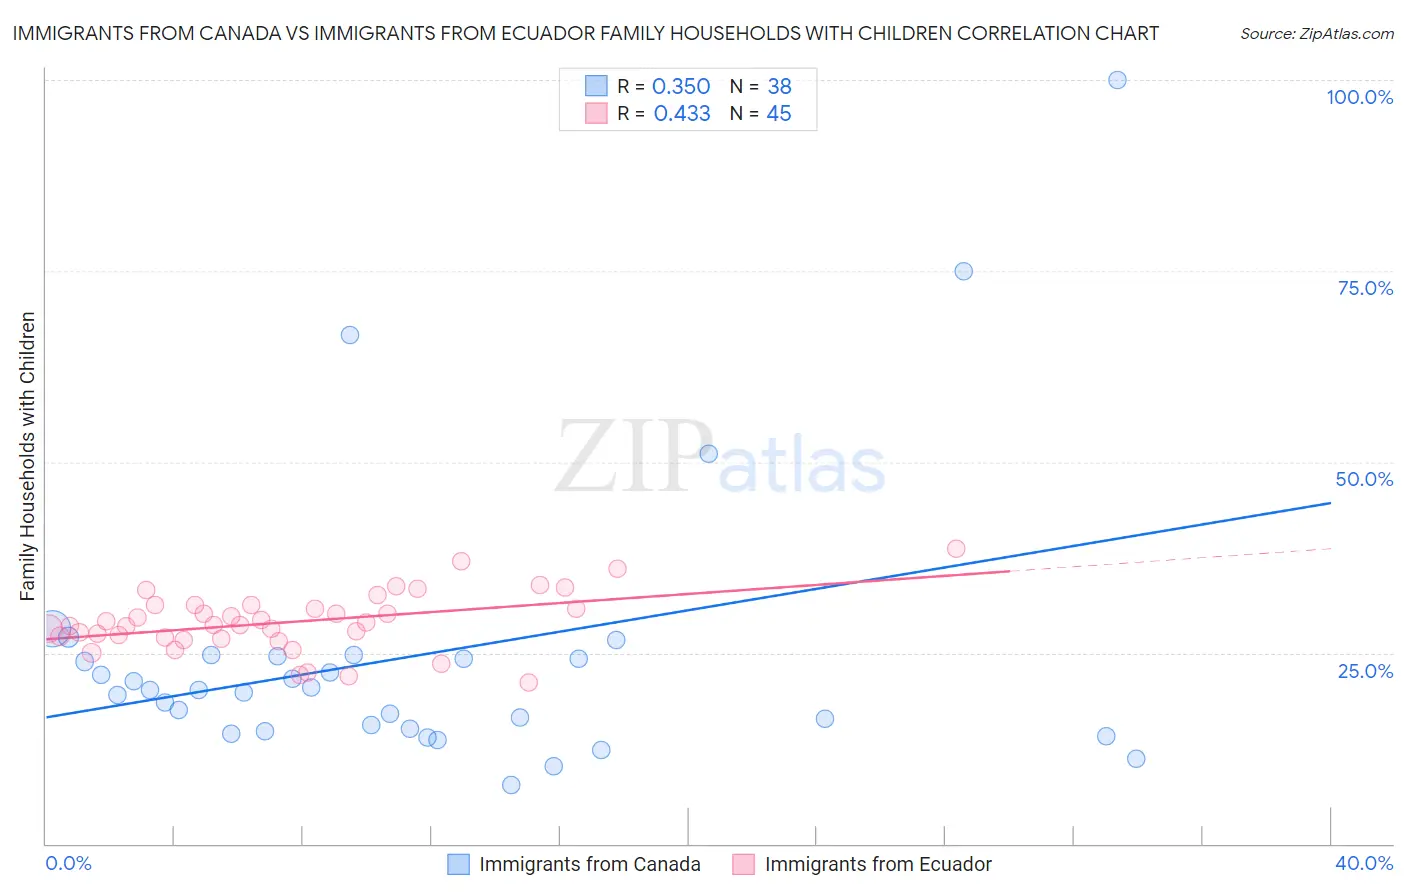 Immigrants from Canada vs Immigrants from Ecuador Family Households with Children